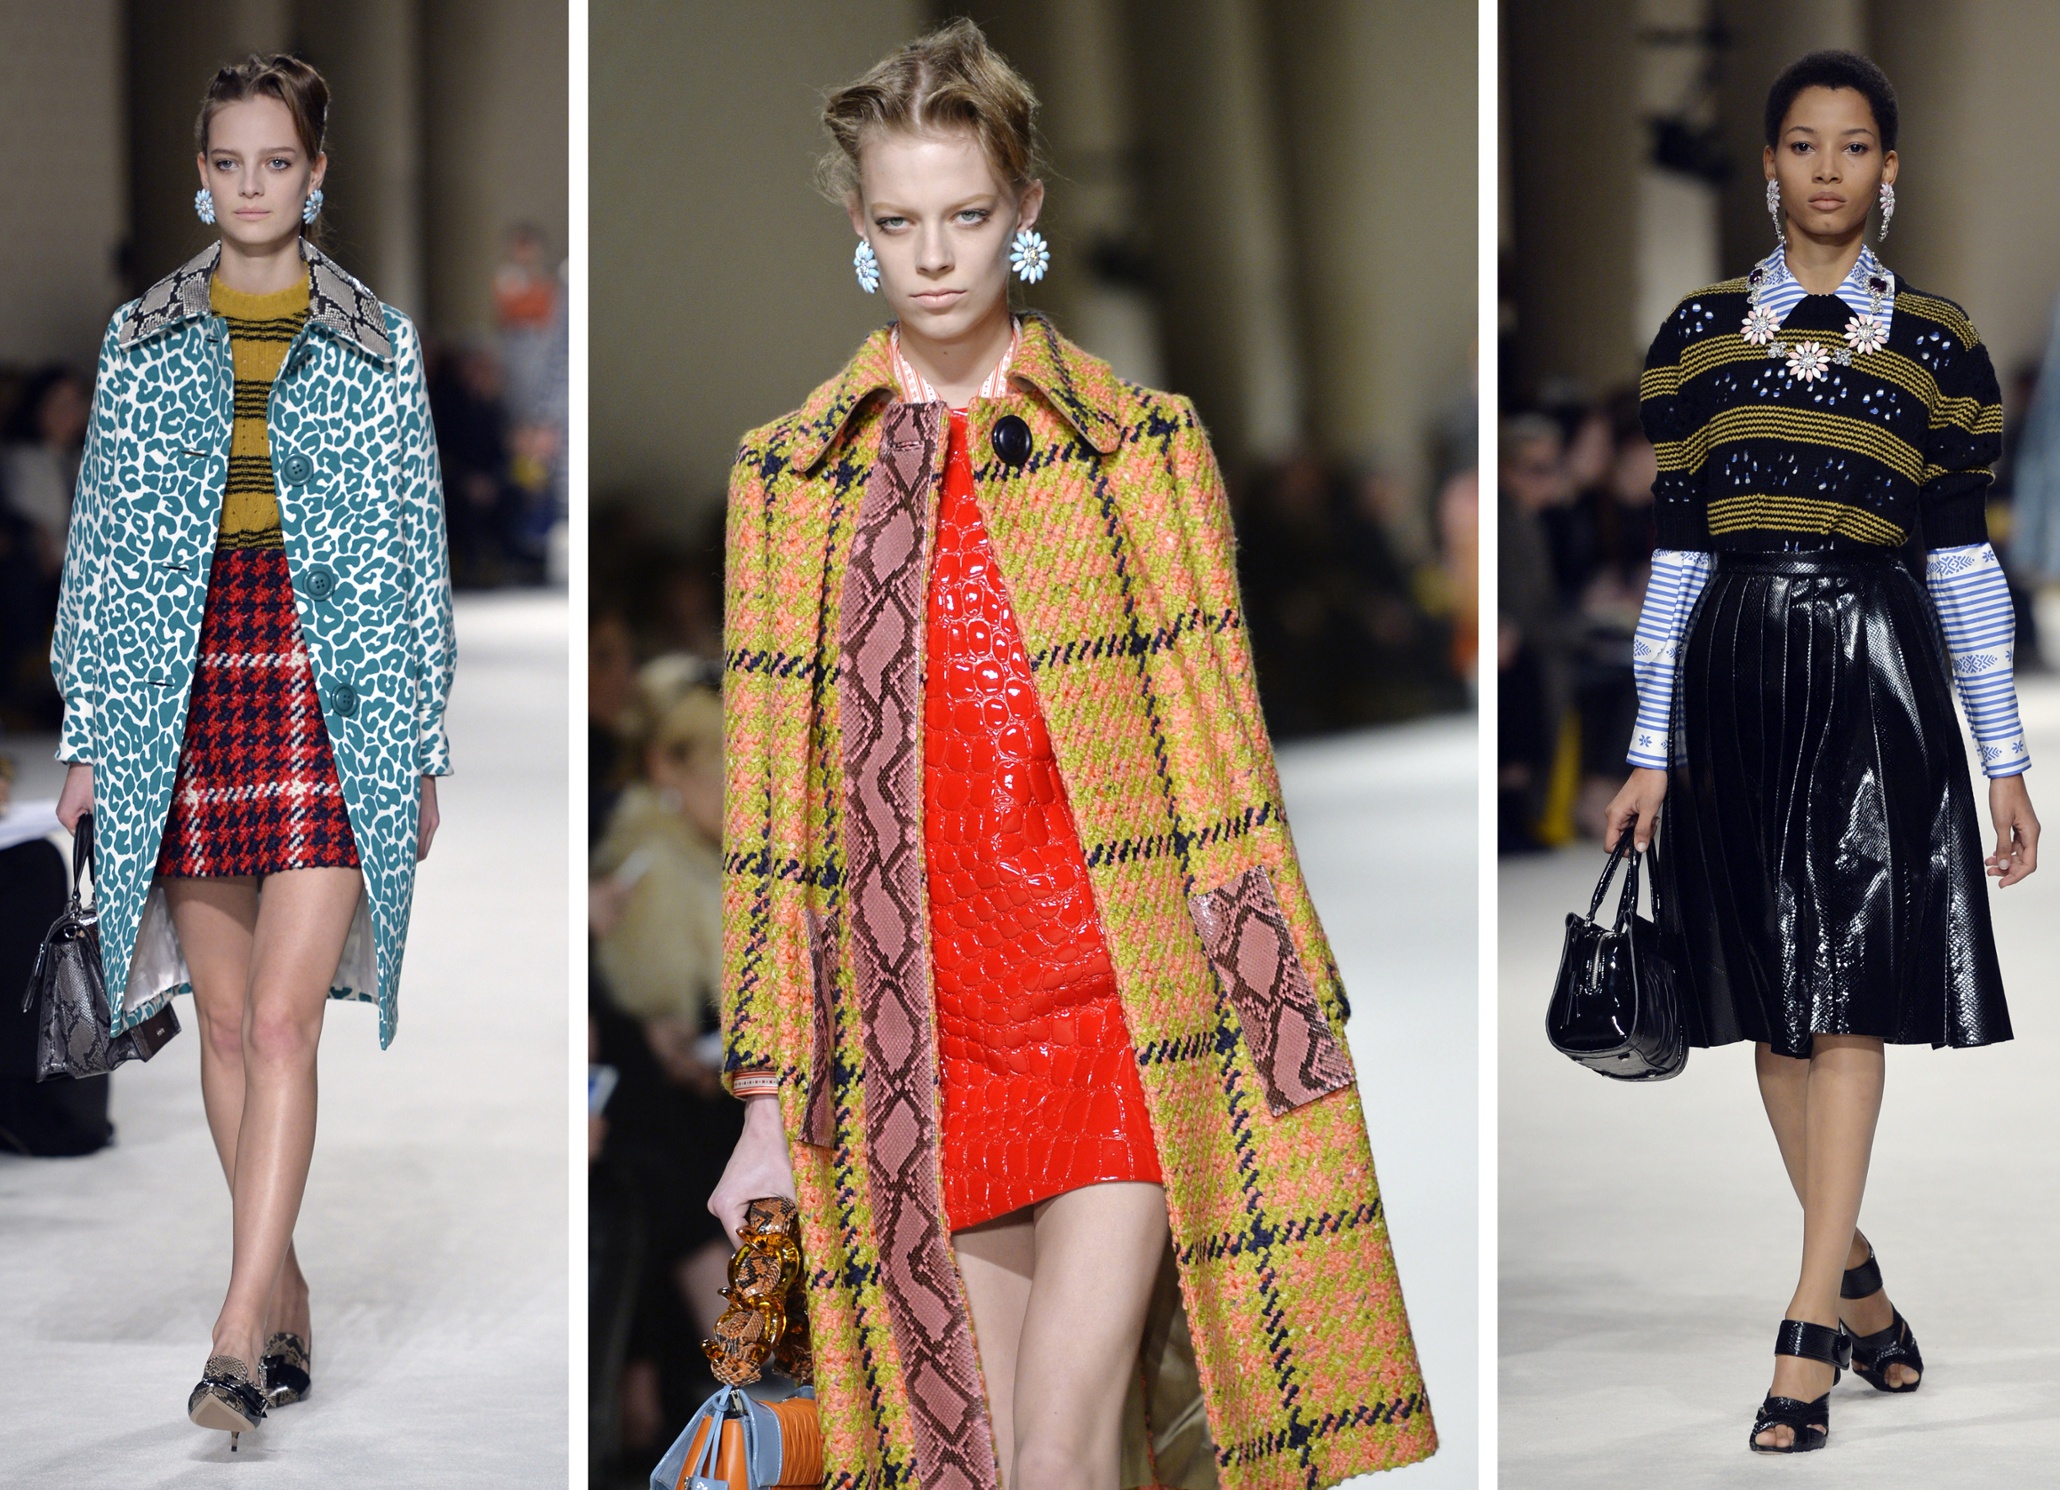 Paris fashion week: the key shows – in pictures | Fashion | The Guardian